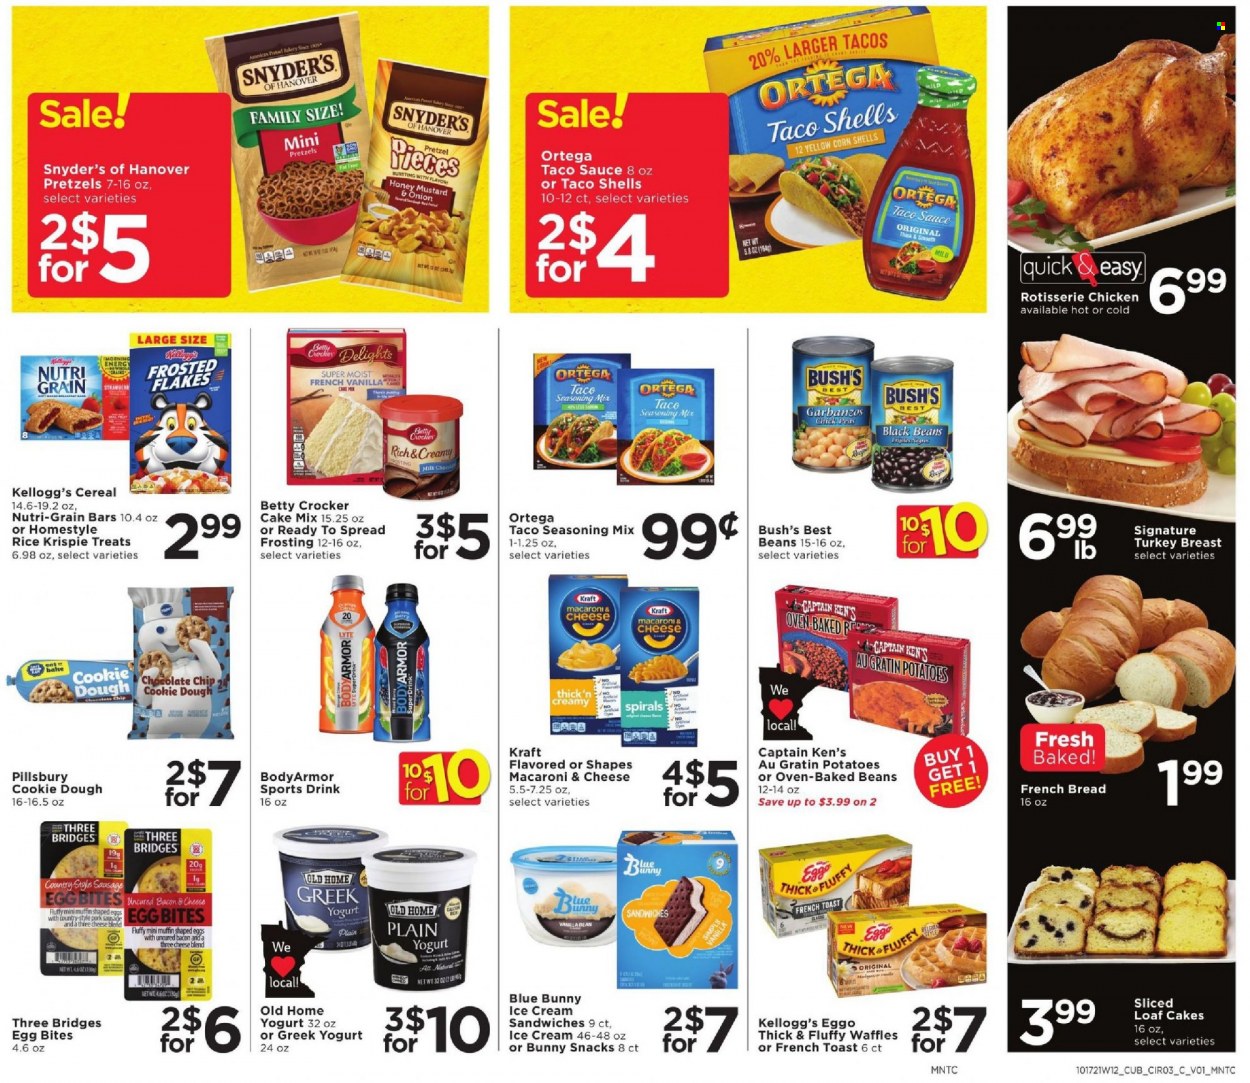 thumbnail - Cub Foods Flyer - 10/17/2021 - 10/23/2021 - Sales products - bread, pretzels, tacos, french bread, muffin, waffles, cake mix, beans, corn, potatoes, peas, macaroni & cheese, chicken roast, sauce, Pillsbury, Kraft®, bacon, sausage, greek yoghurt, yoghurt, eggs, ice cream, ice cream sandwich, Blue Bunny, cookie dough, chocolate chips, snack, Kellogg's, Nutri-Grain bars, frosting, black beans, baked beans, cereals, Frosted Flakes, Nutri-Grain, rice, spice, mustard, taco sauce, honey mustard. Page 3.